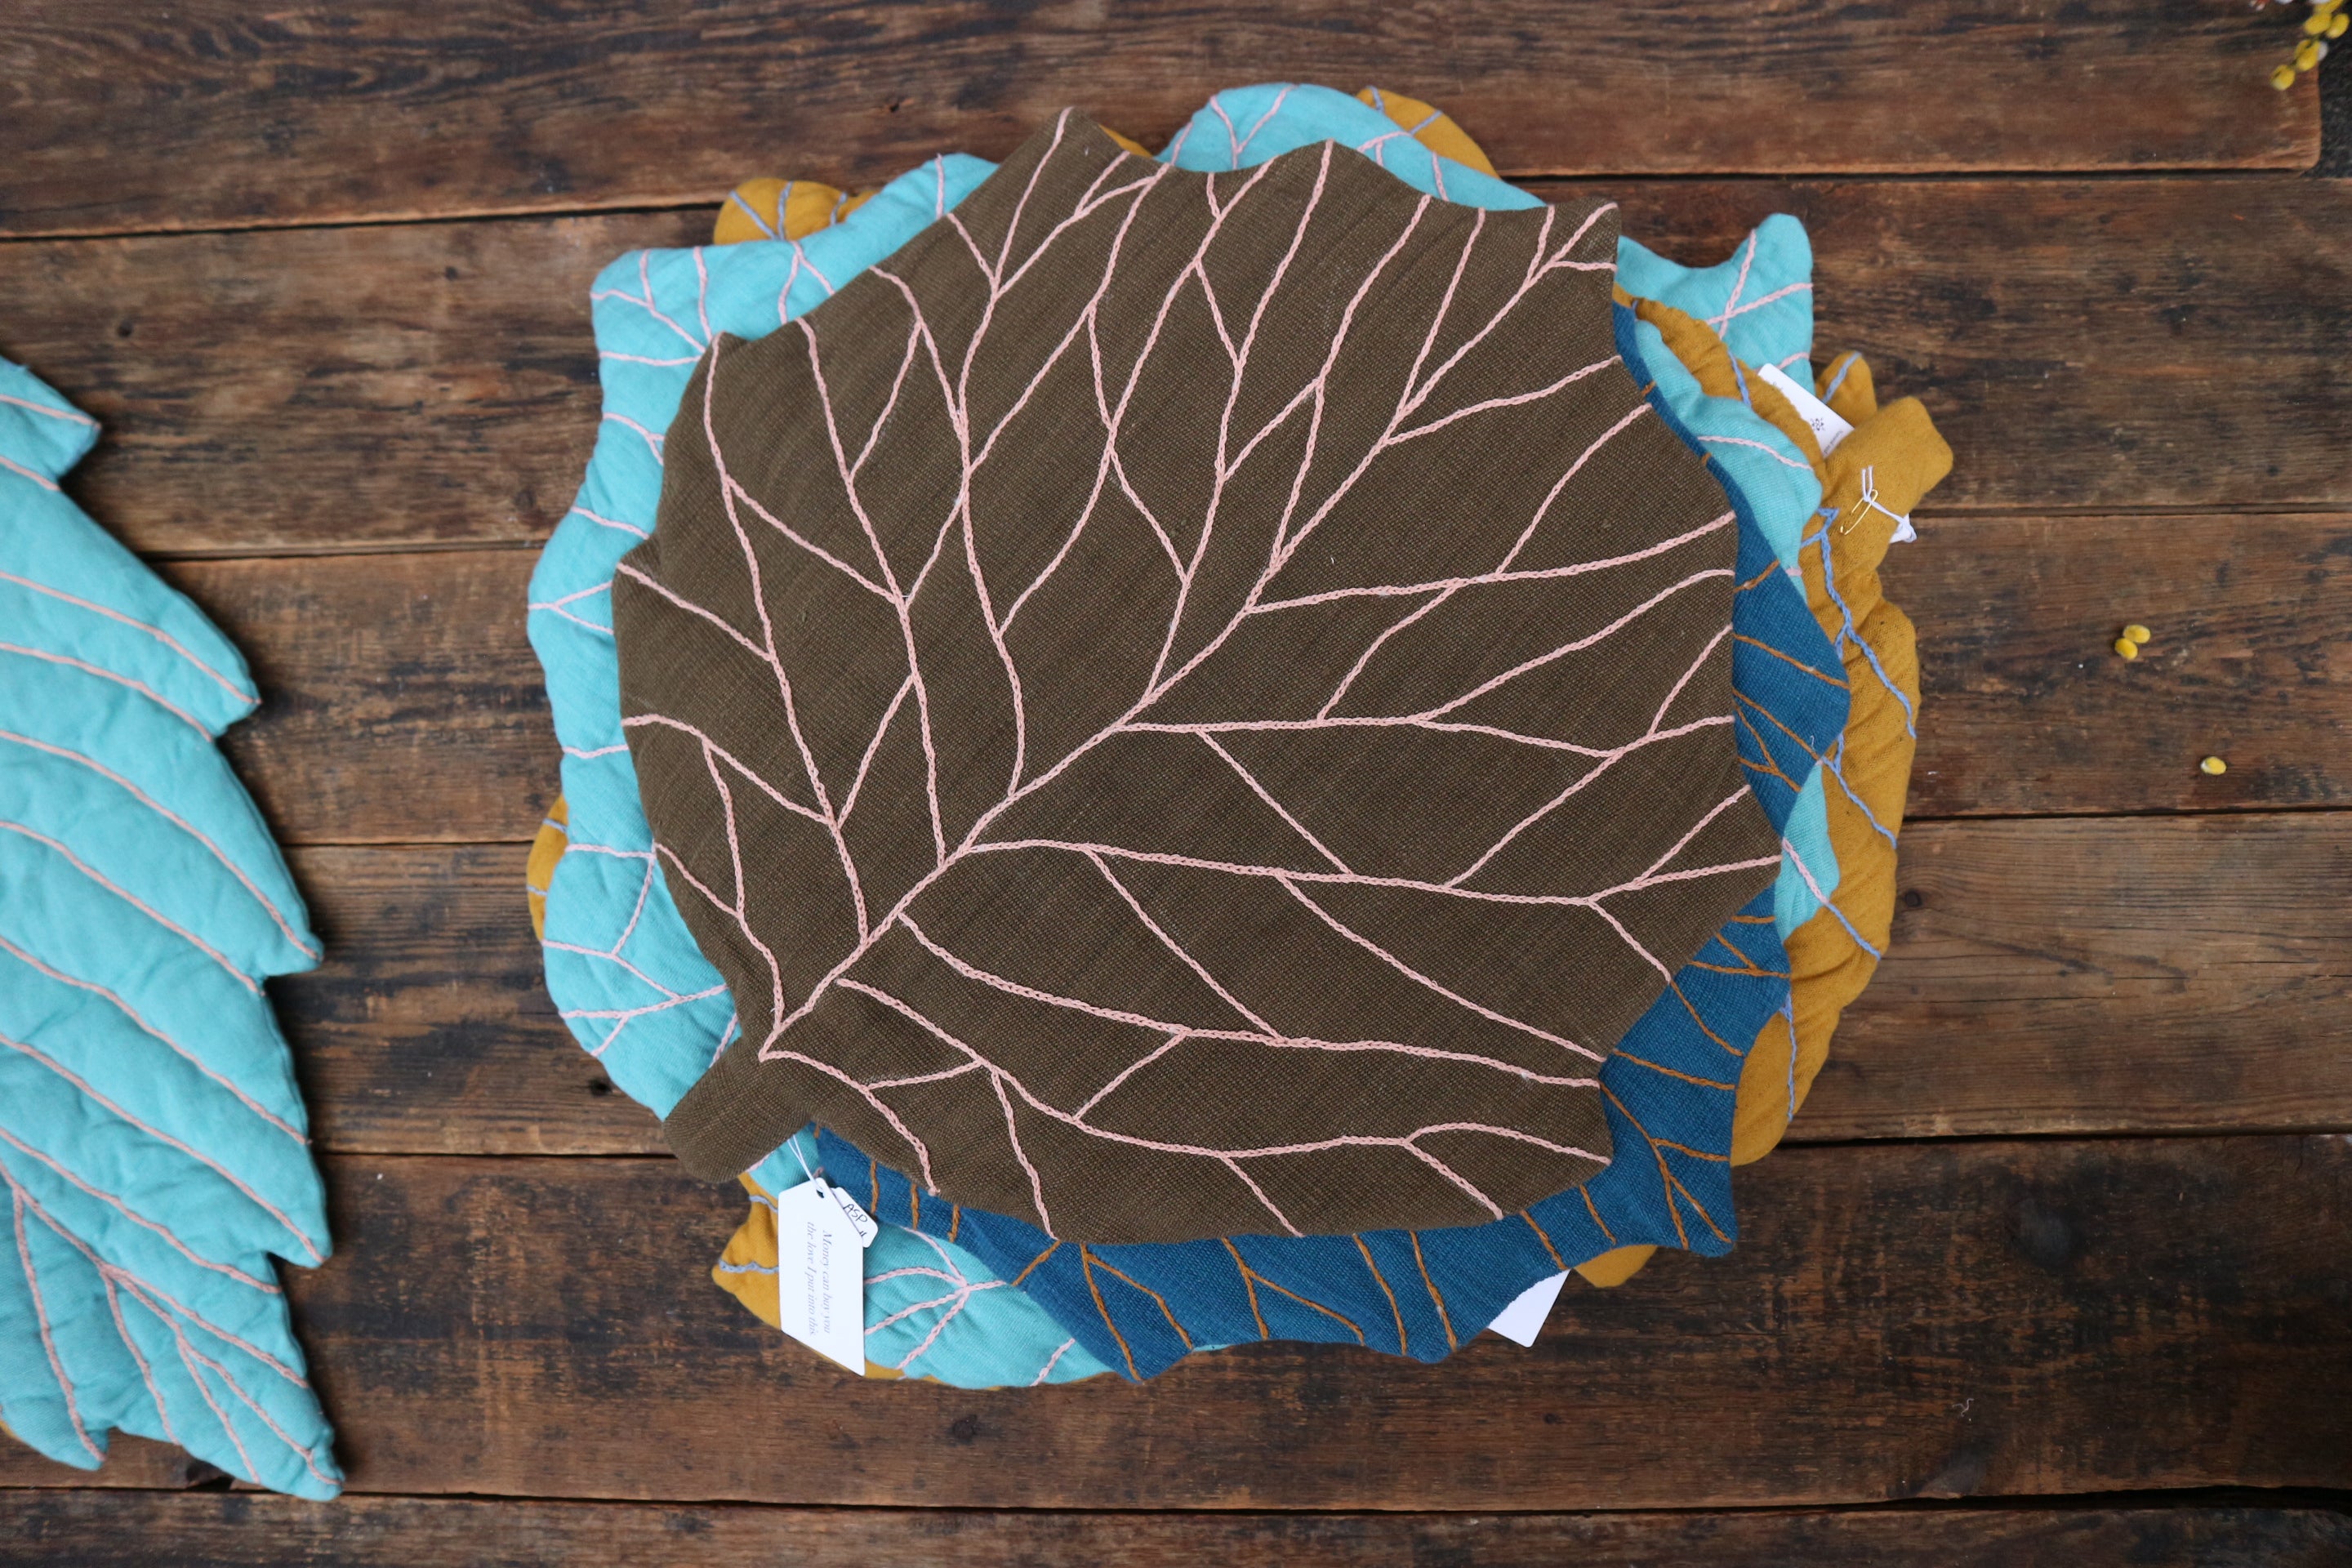 Leaf quilt ° A∫P small